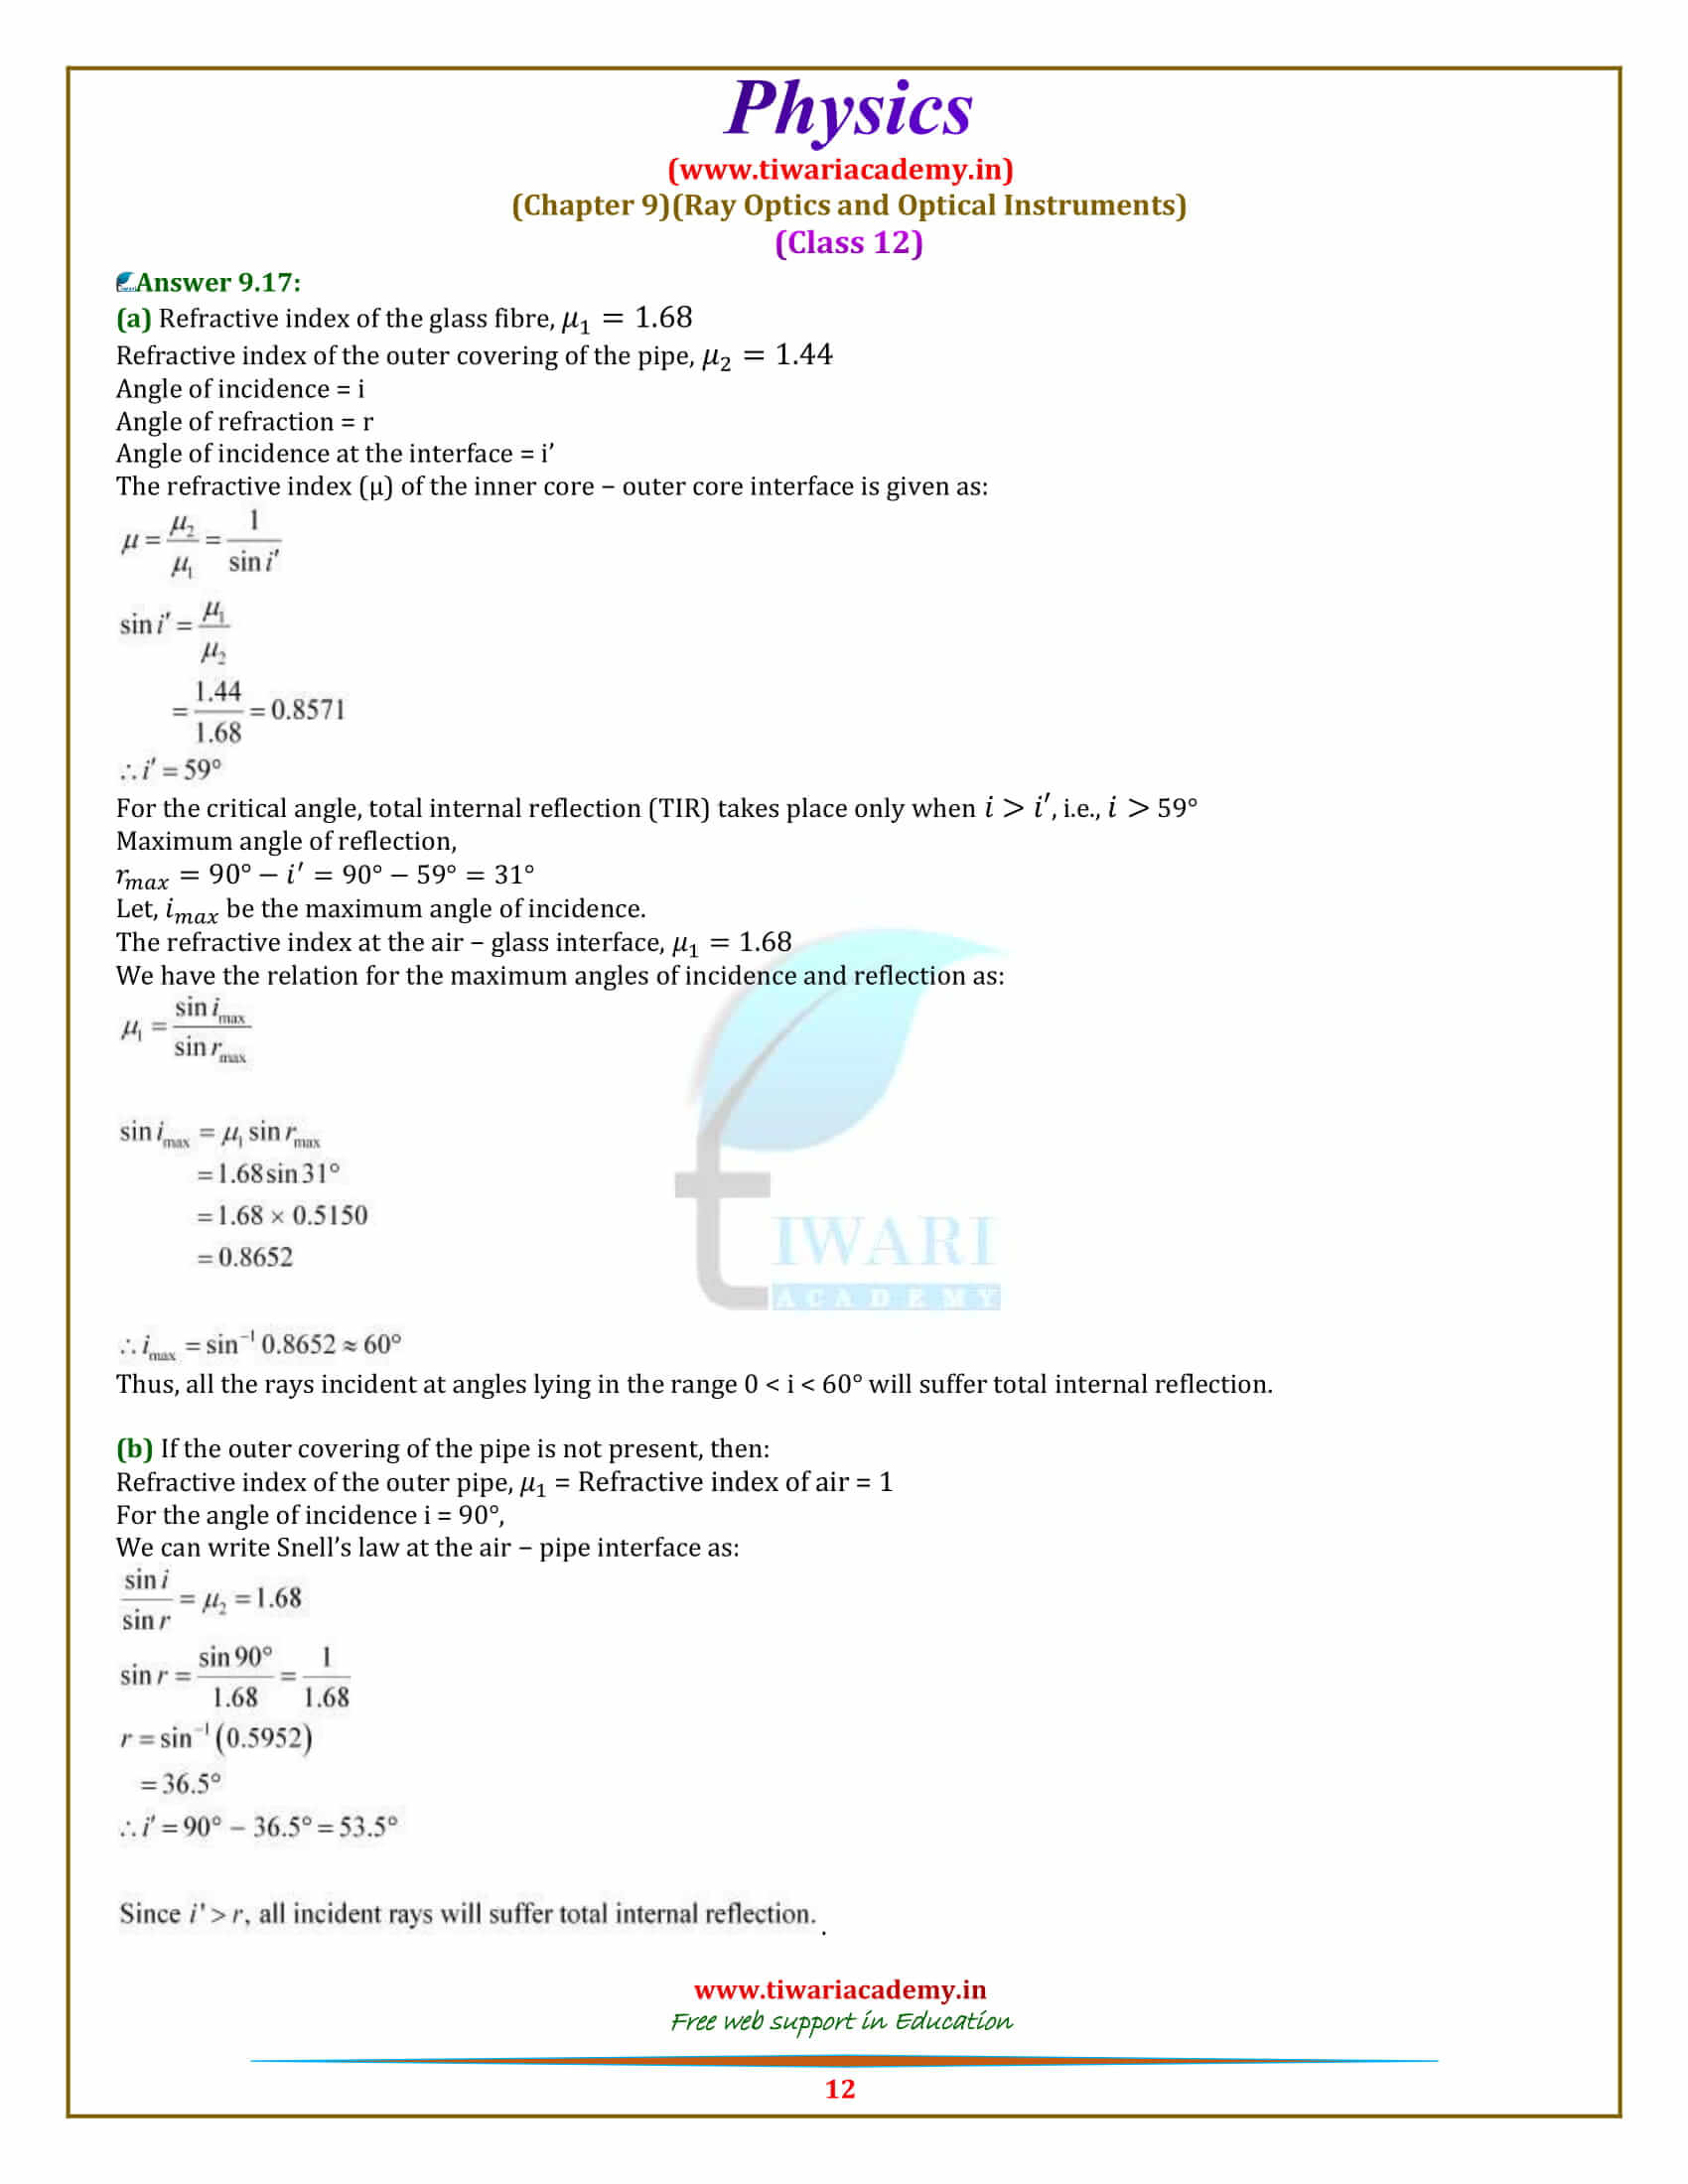 NCERT Solutions for Class 12 Physics Chapter 9 all question answers